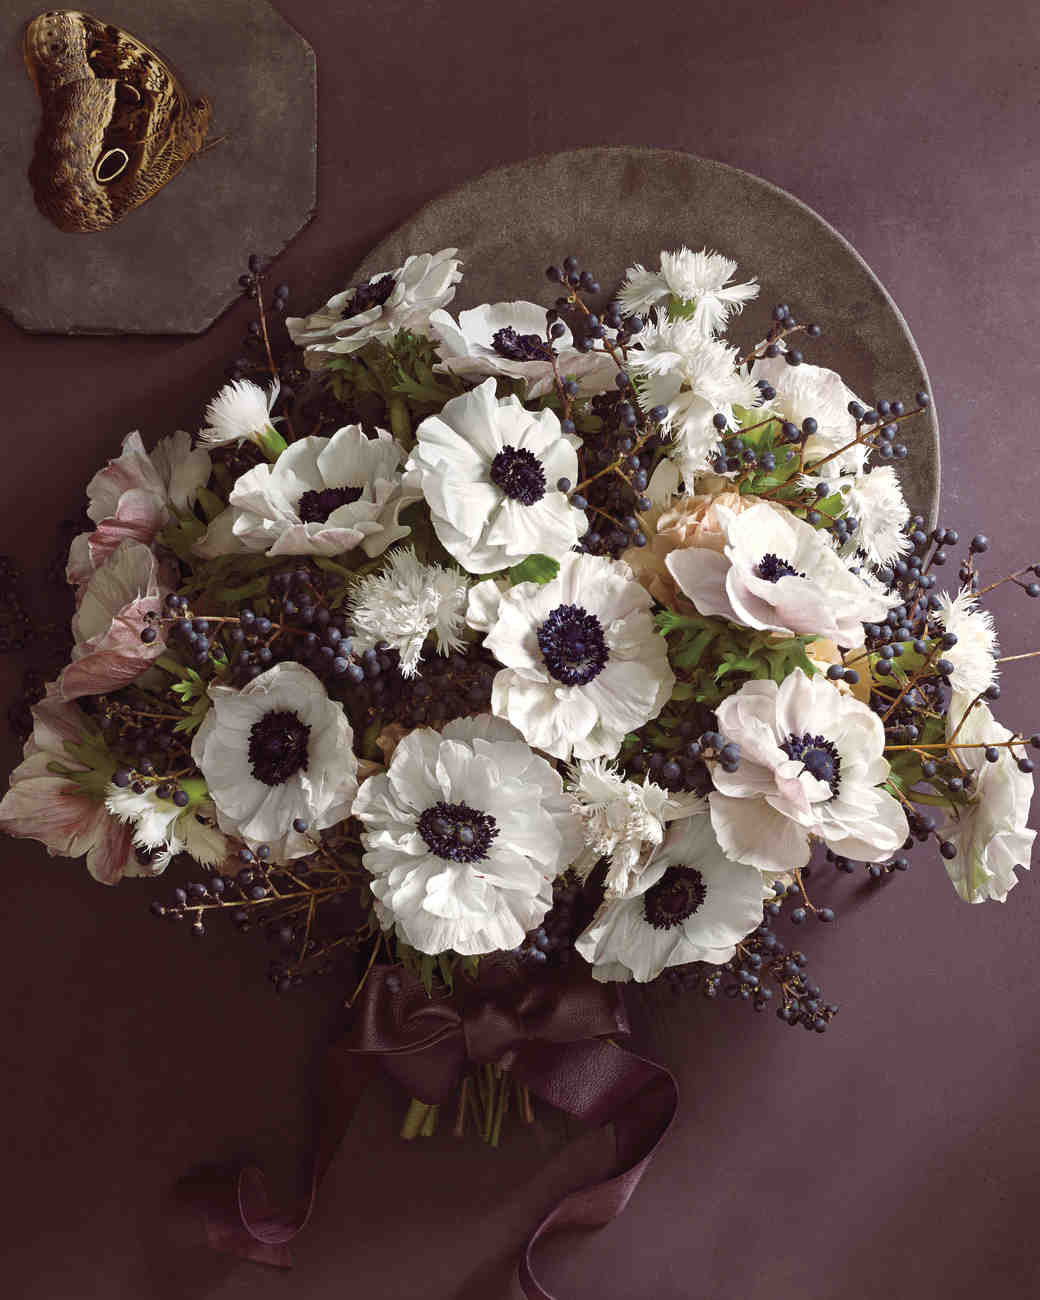 Popular Flowers For Weddings
 8 Bouquets Inspired by the Most Popular Wedding Flowers